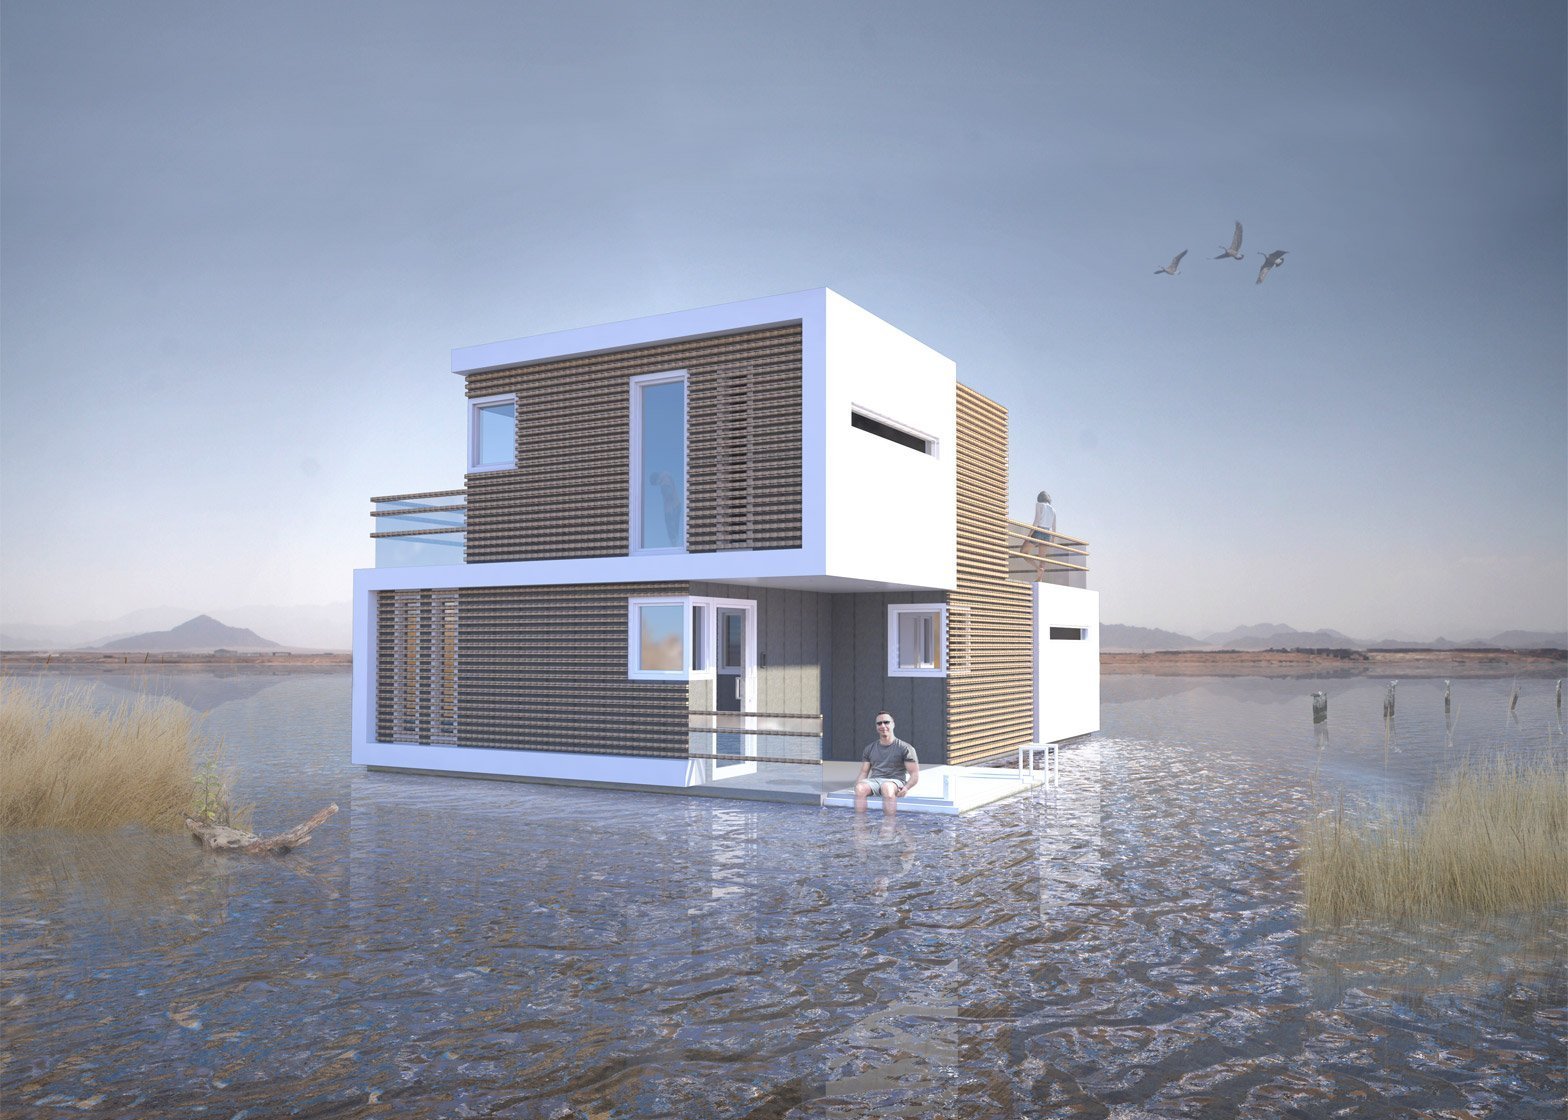 Houseboat for two in the Netherlands: in case of divorce housing is divided into 2 parts without difficulty